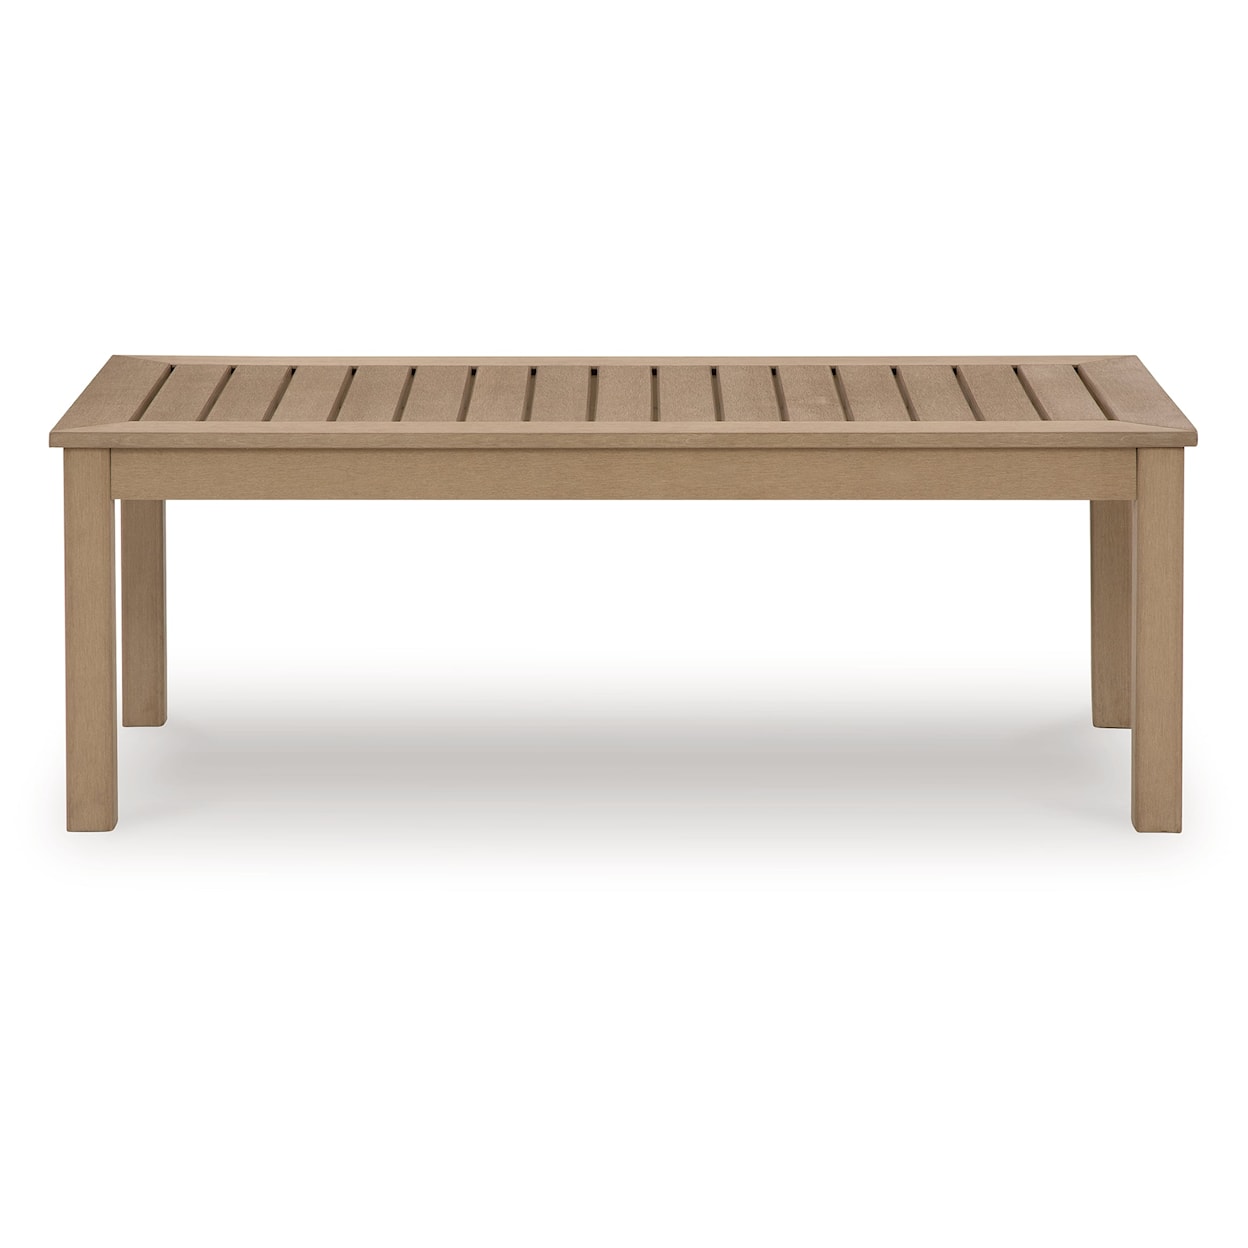 Benchcraft Hallow Creek Outdoor Coffee Table